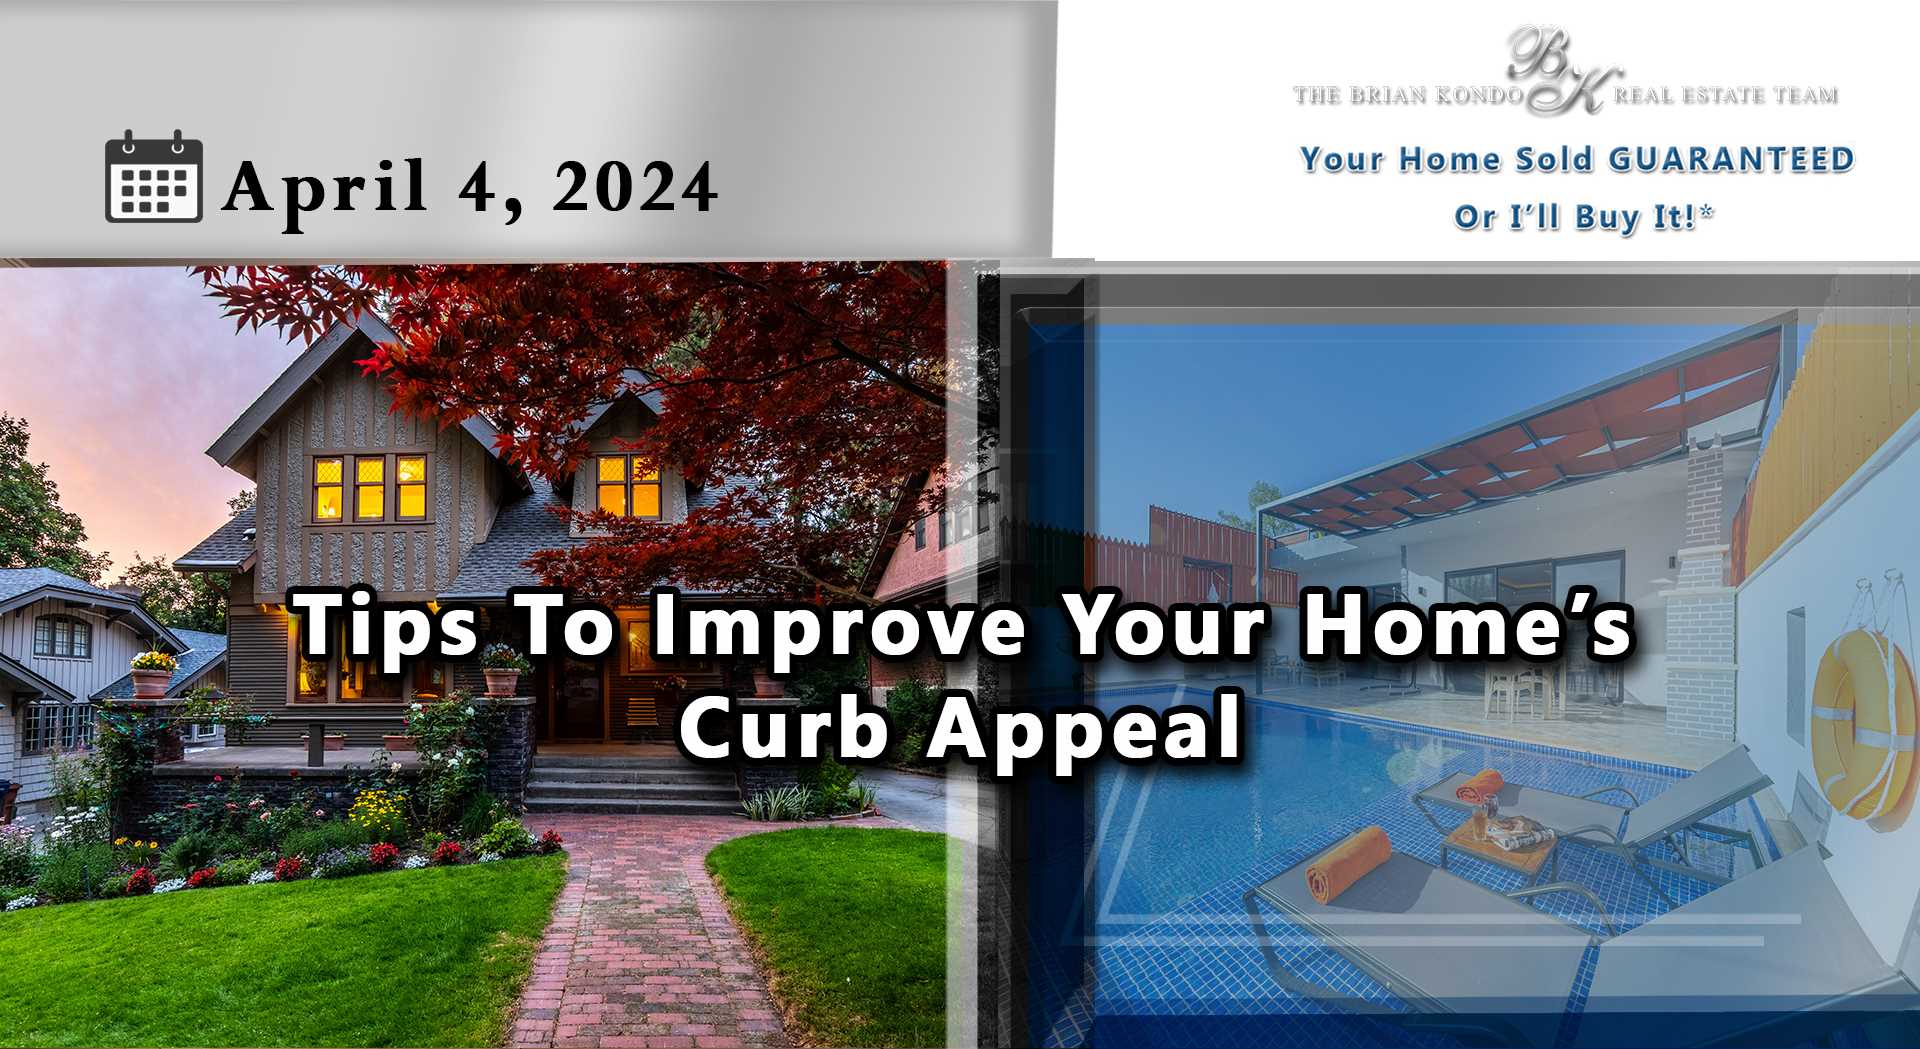 Tips To Improve Your Home’s Curb Appeal